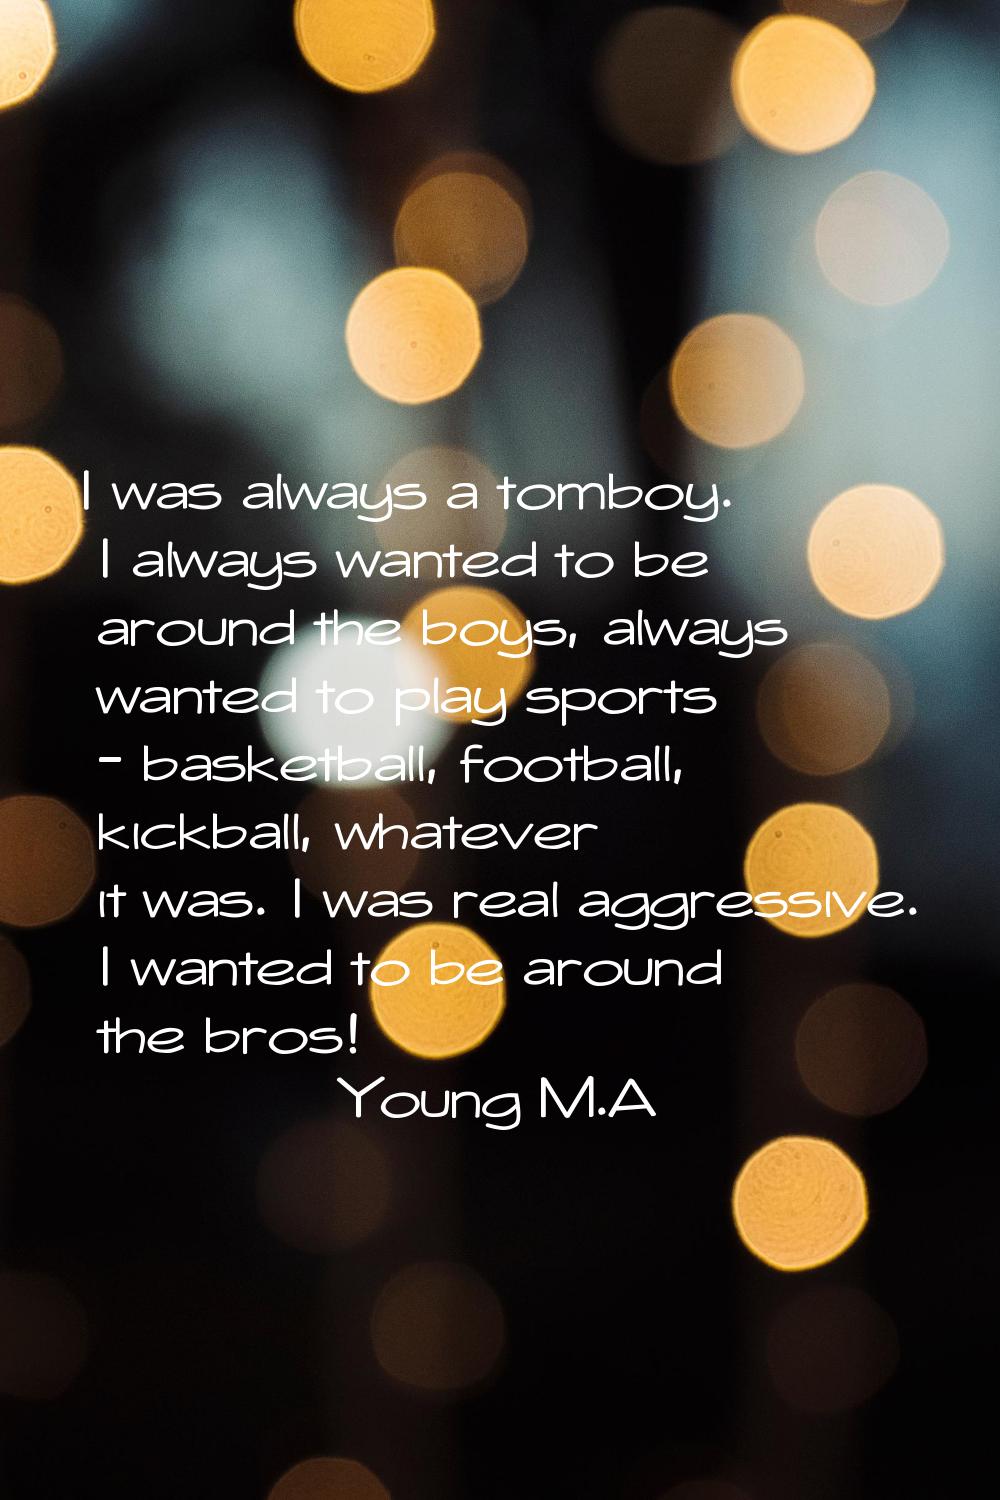 I was always a tomboy. I always wanted to be around the boys, always wanted to play sports - basket